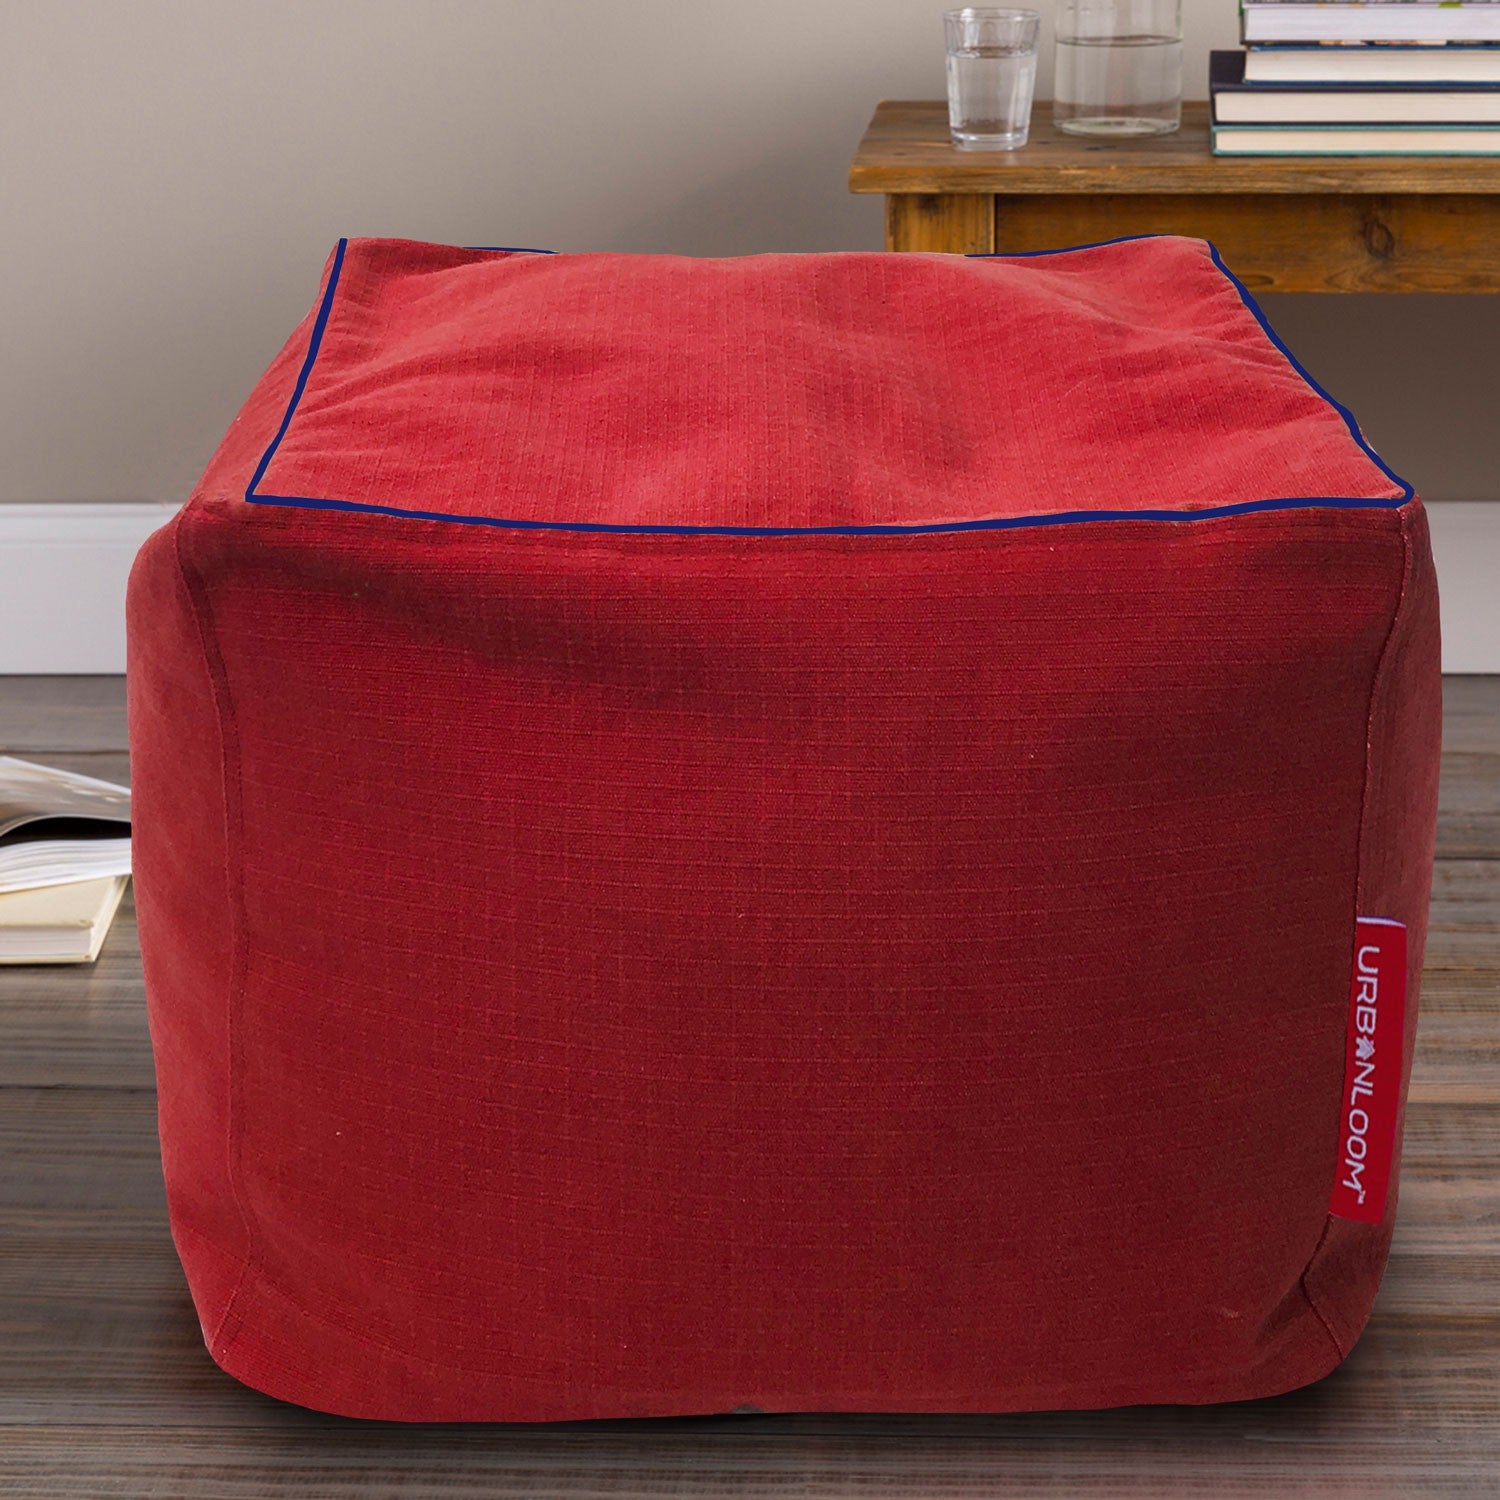 Cotton Handloom Pouf/Ottoman/Footstool cover (Red)